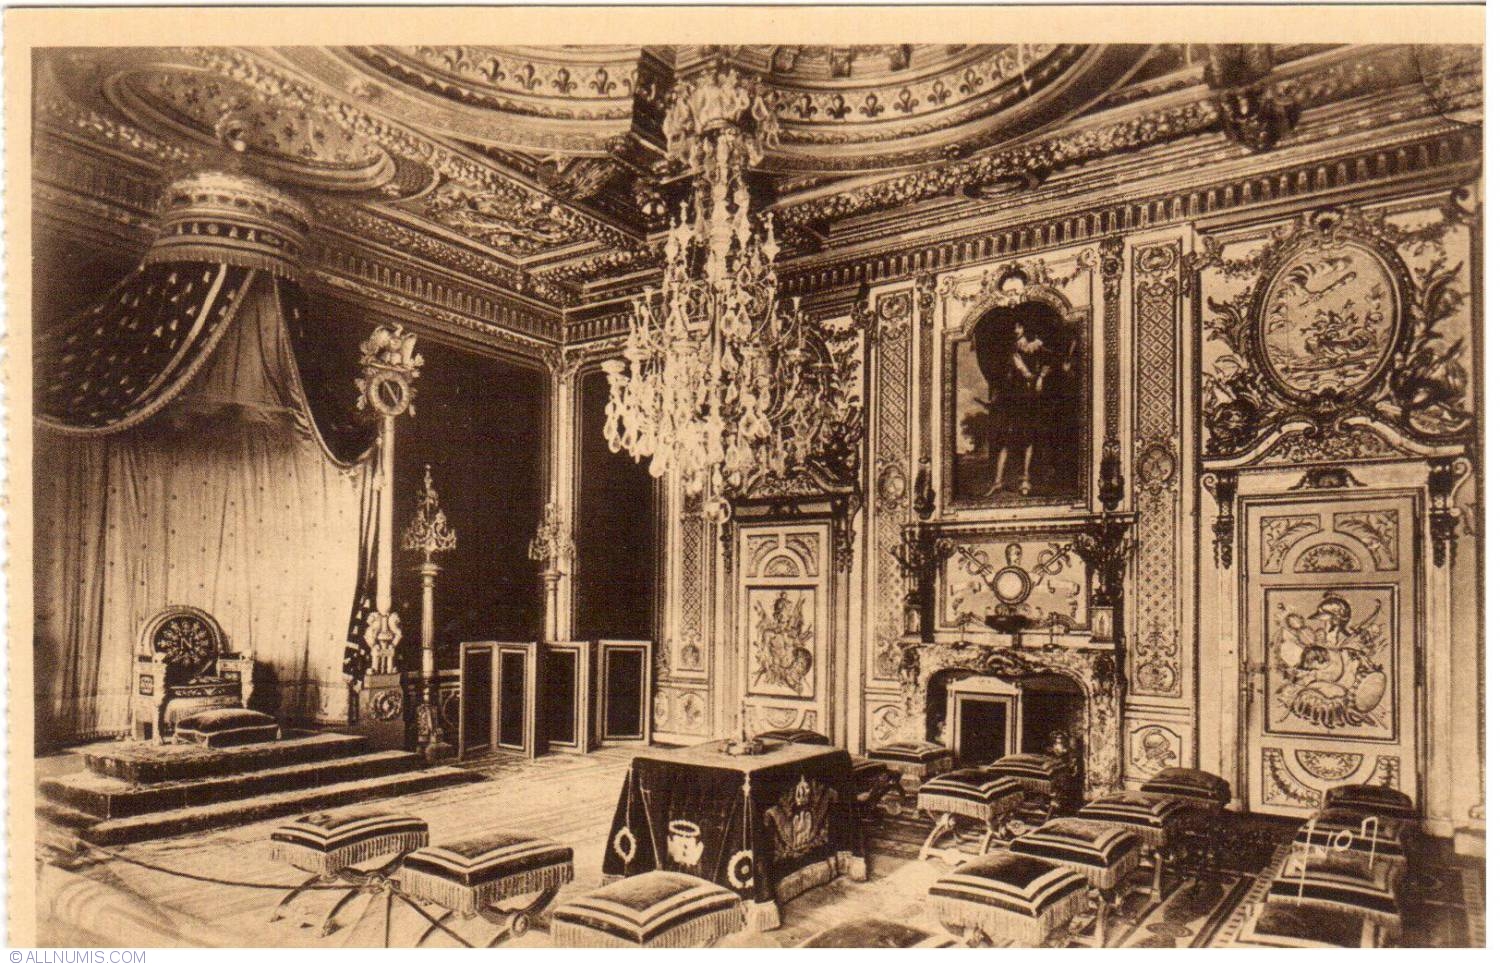 Throne Room, Palace of Fontainebleau (b / w photo)